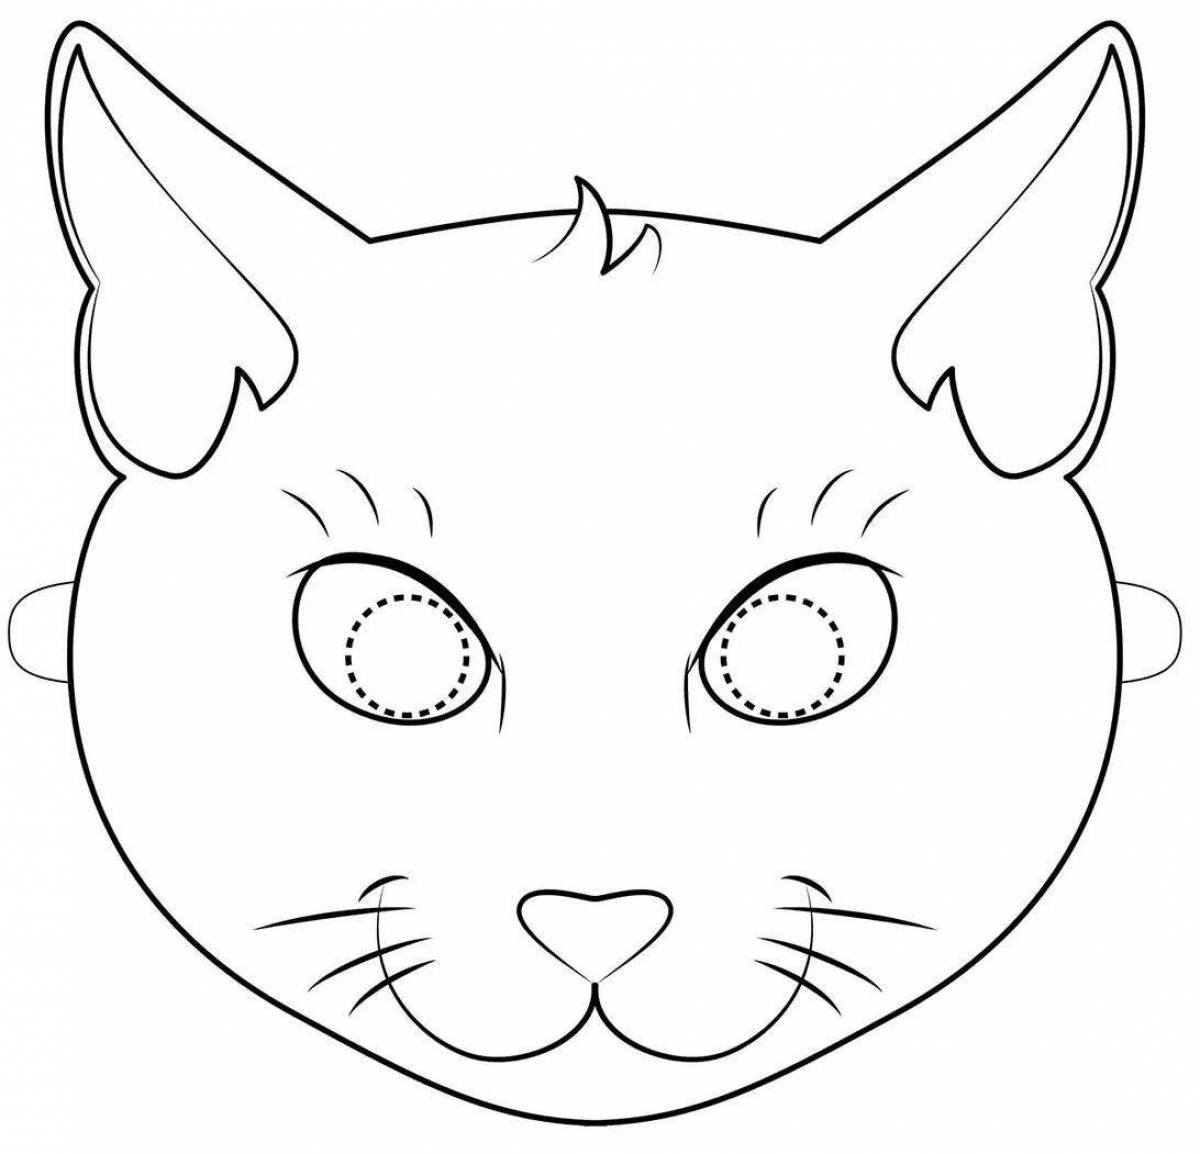 Joyful cat face coloring pages for kids